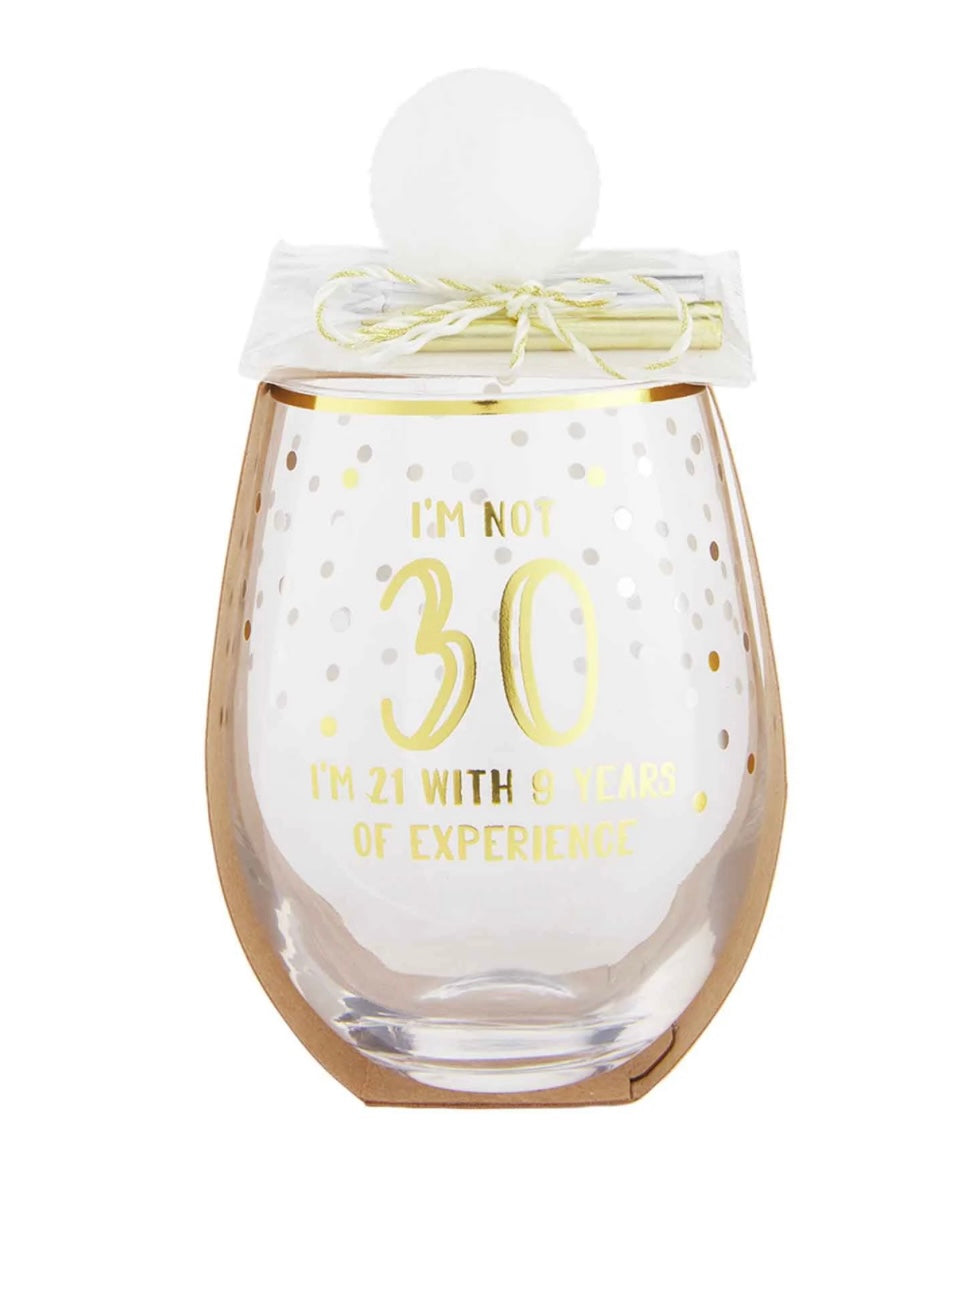 White stemless wine glasses with confetti details that says "I'm not 30, I'm 21 with 9 years experience".